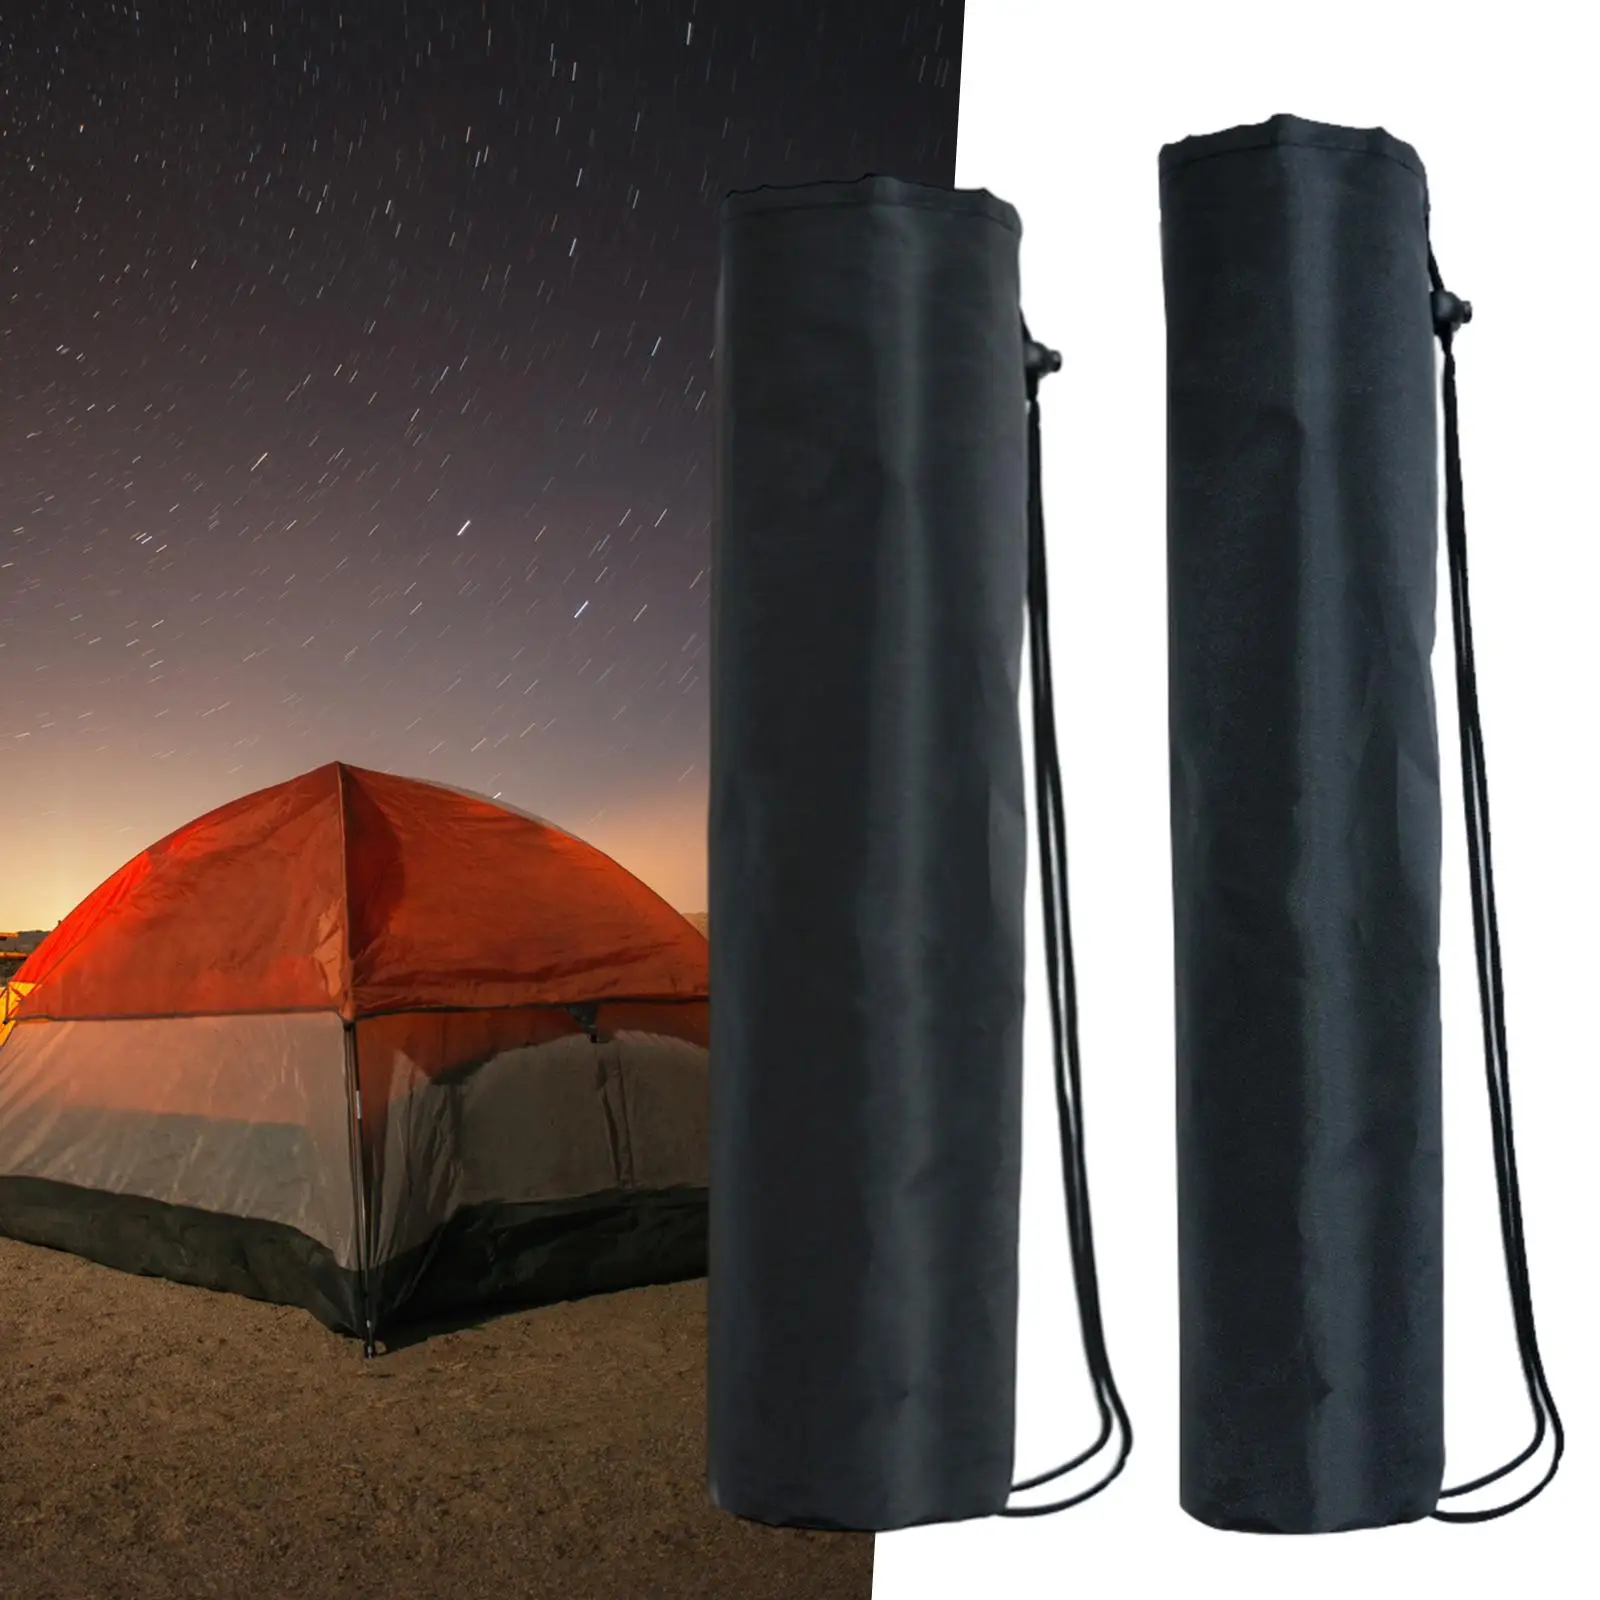 Tent Storage Bag Luggage Lightweight Portable Tent Pole Bag Tent Accessories Carrying Bag for Trekking Outdoor Travel Trips BBQ